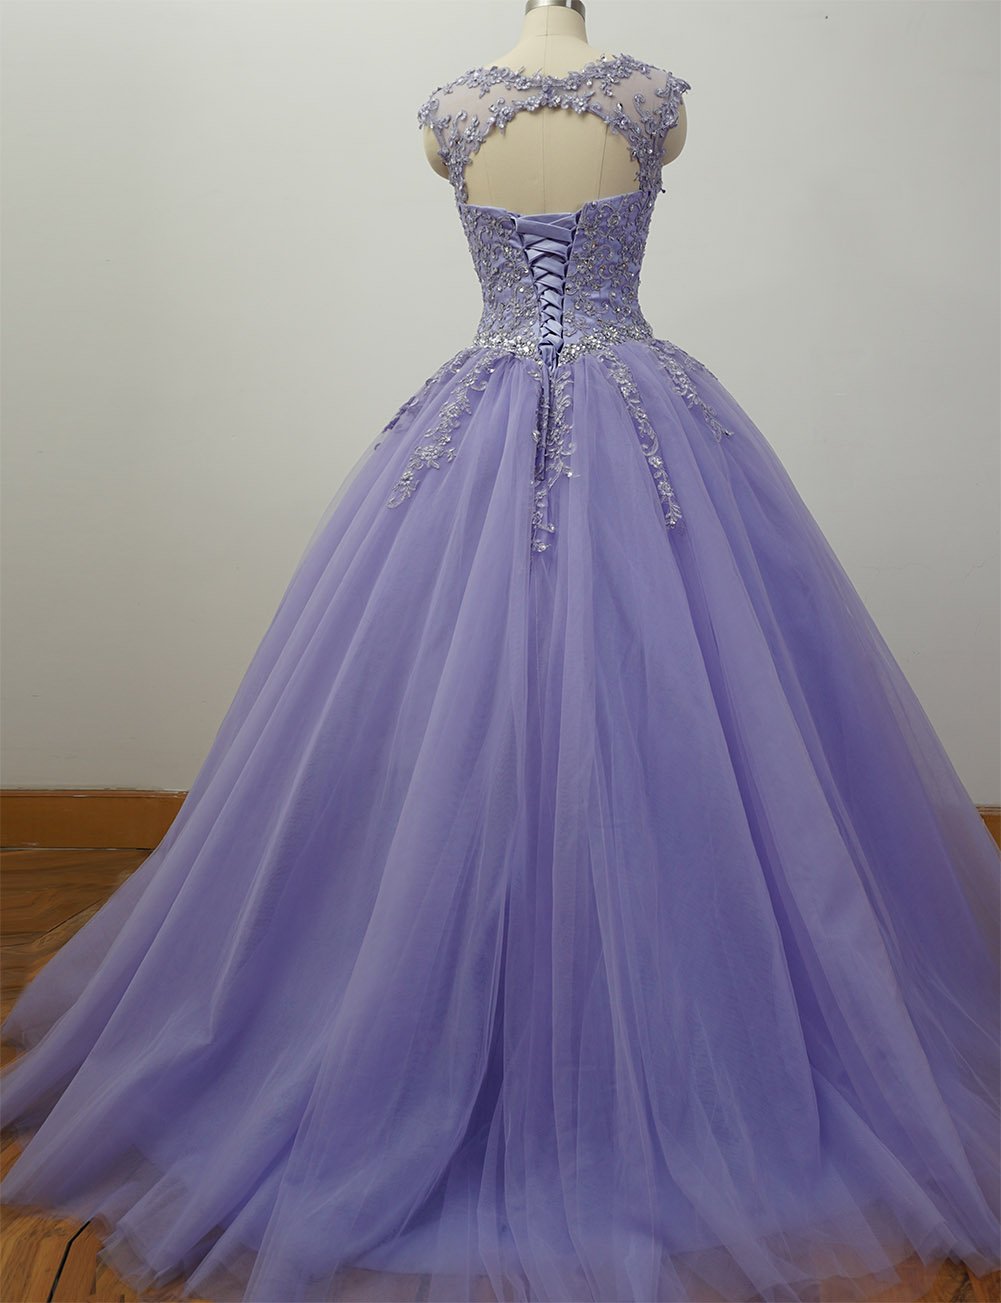 Gorgeous Cap Sleeves Lavender Ball Gown Quinceanera Dresses lace Appliqued ,Beading Bling Bling Sweet 16 dress, Debutante Gown,prom dresses   cg14660